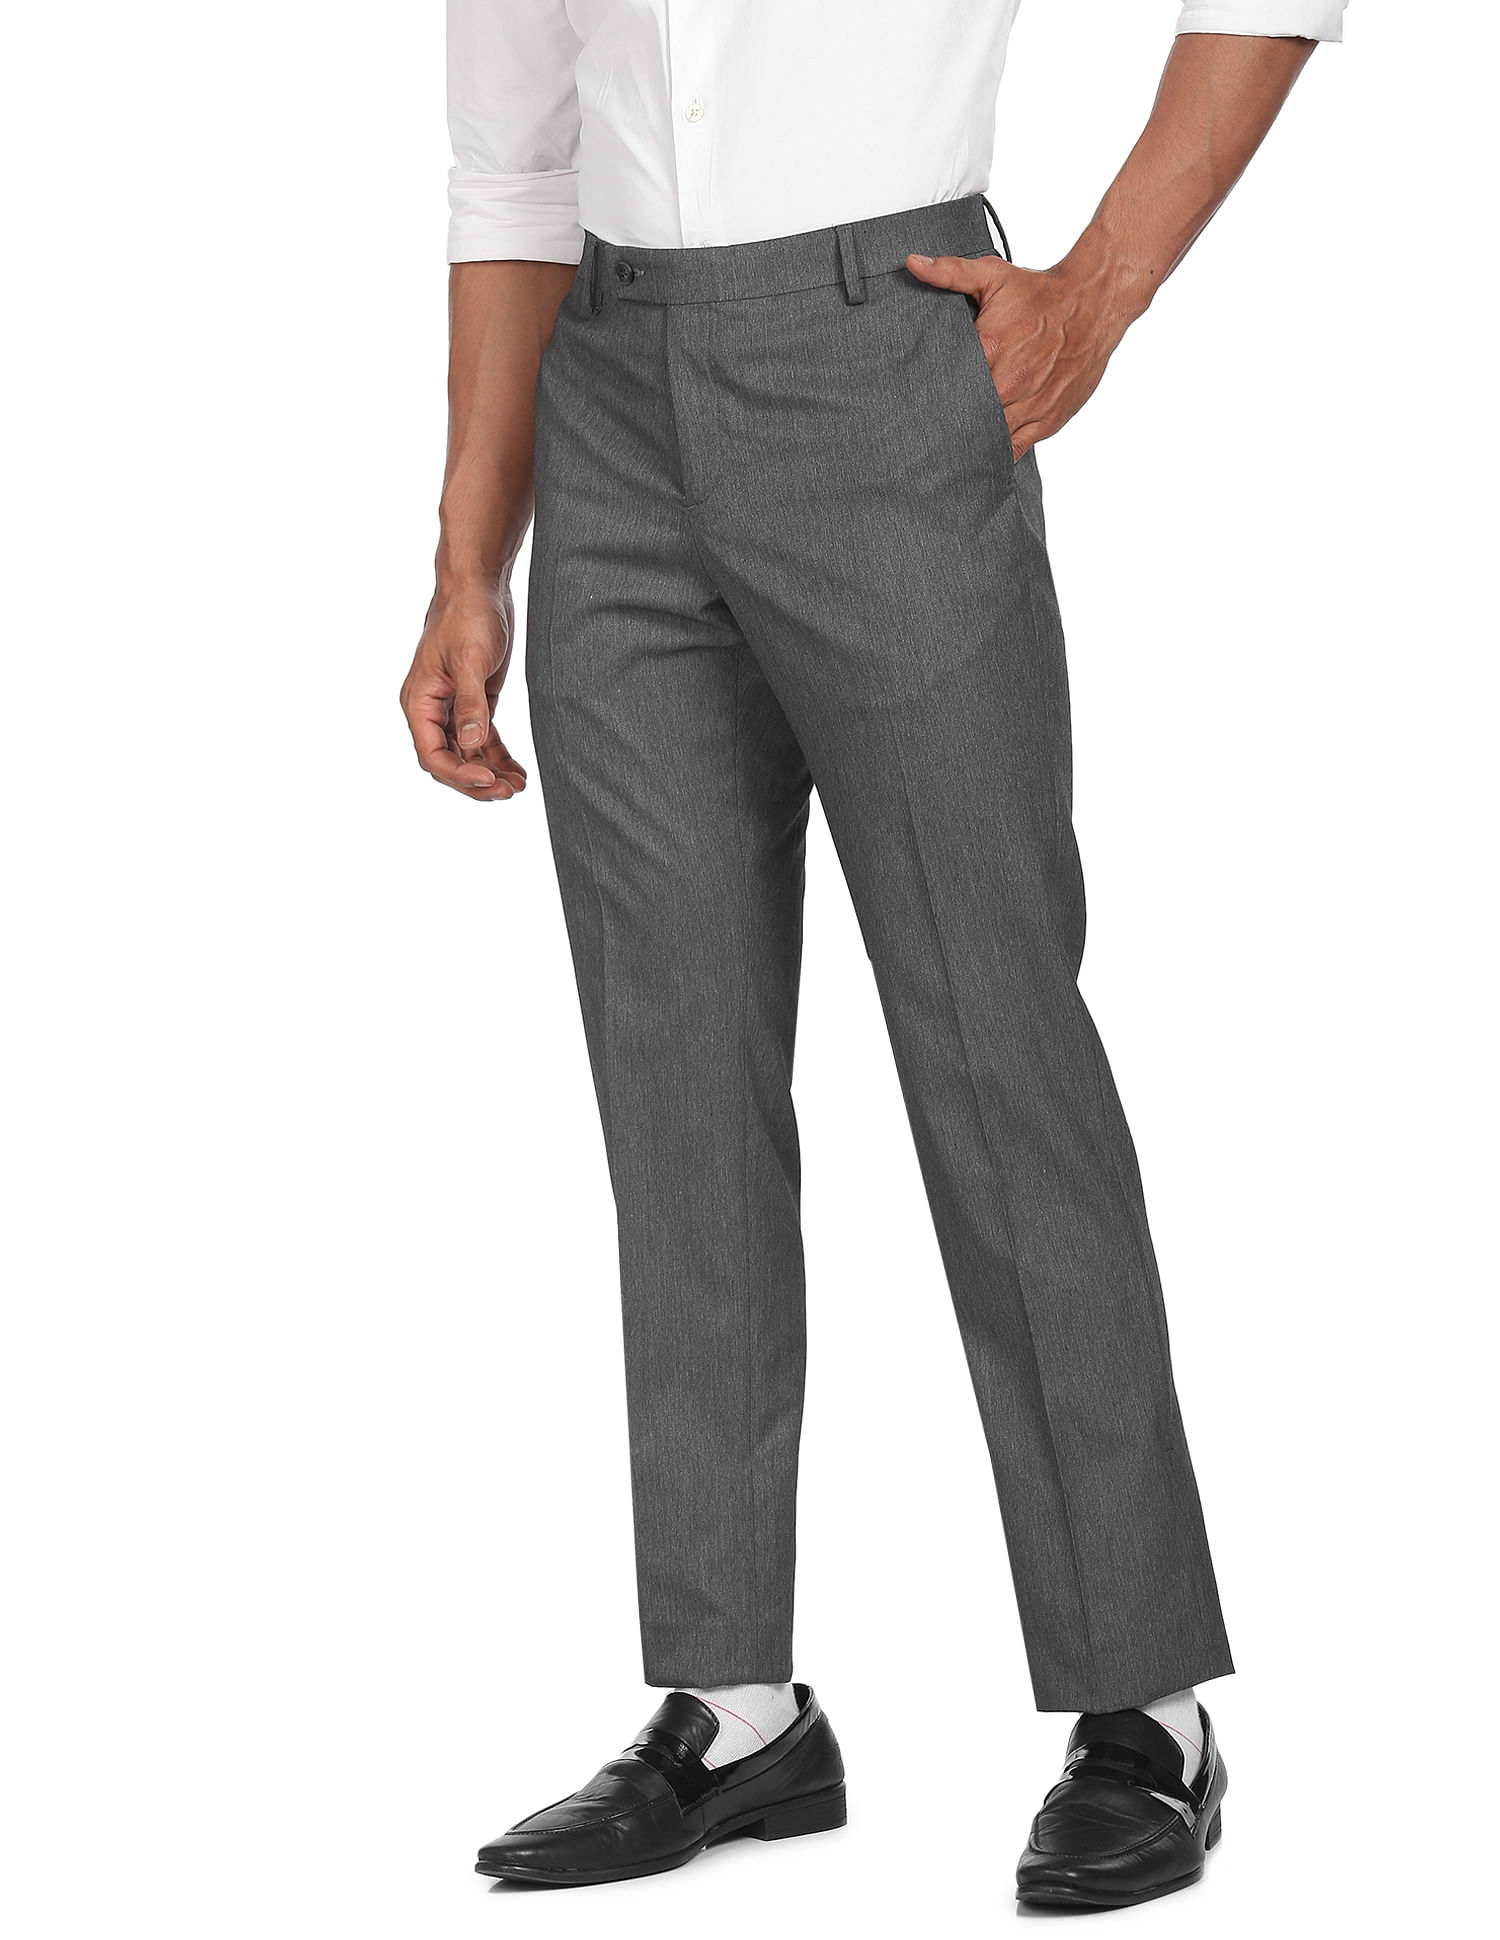 Buy Arrow Newyork Flat Front Textured Formal Trousers - NNNOW.com